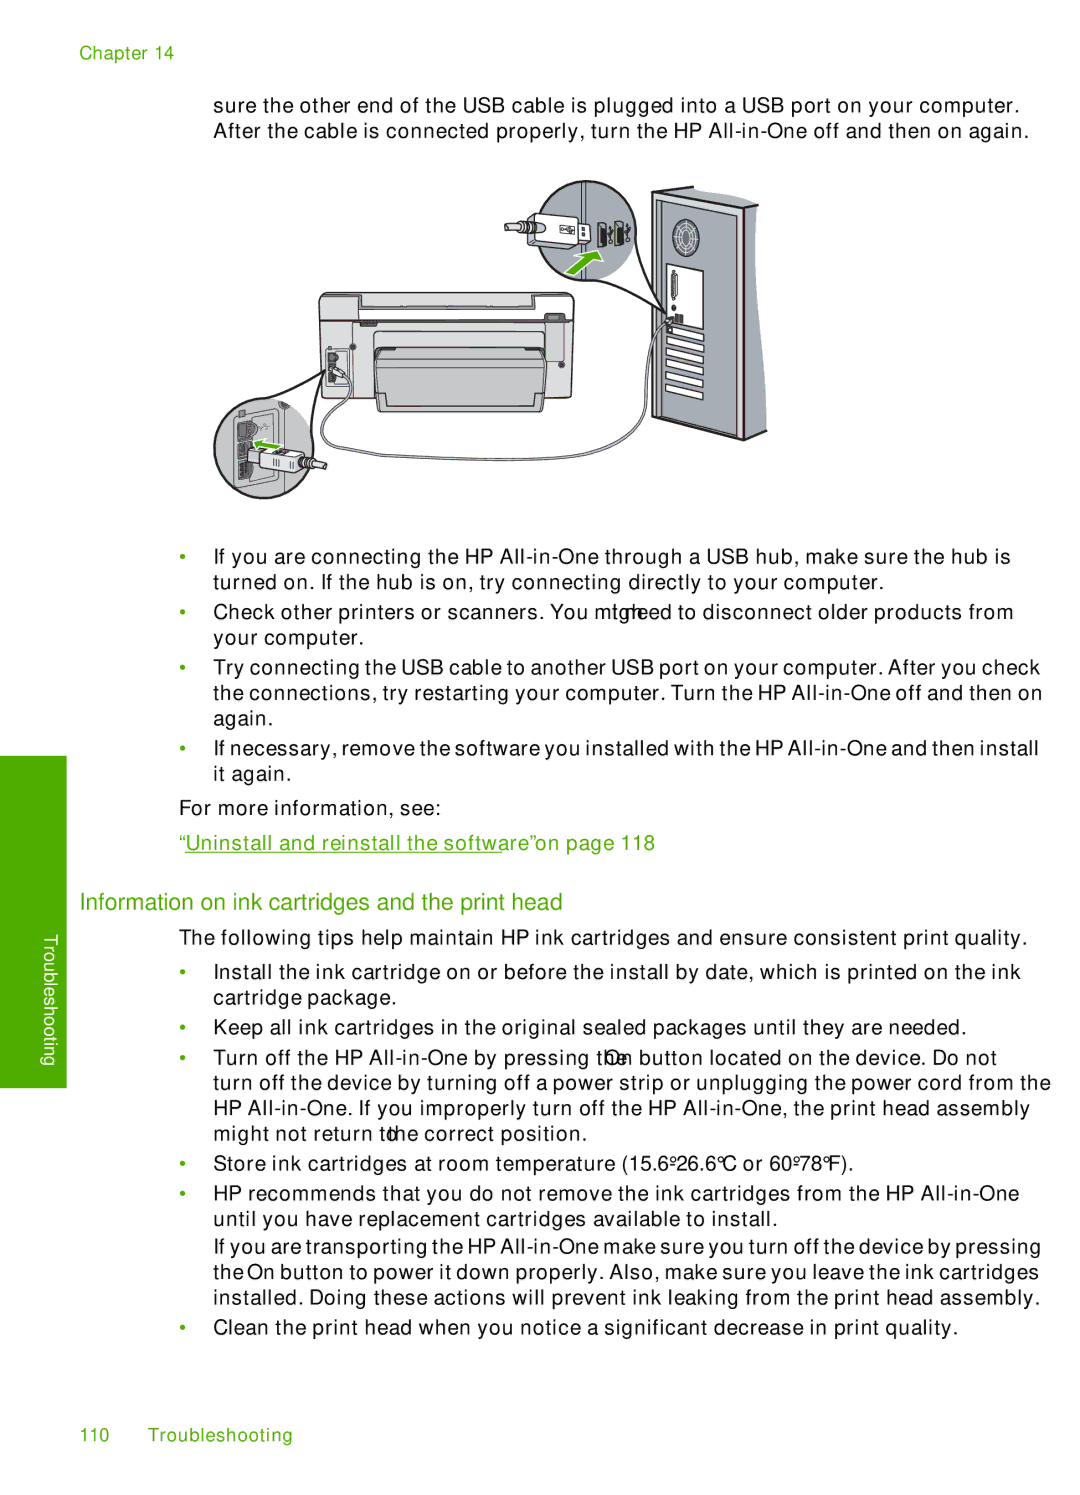 HP C6200 manual Information on ink cartridges and the print head 